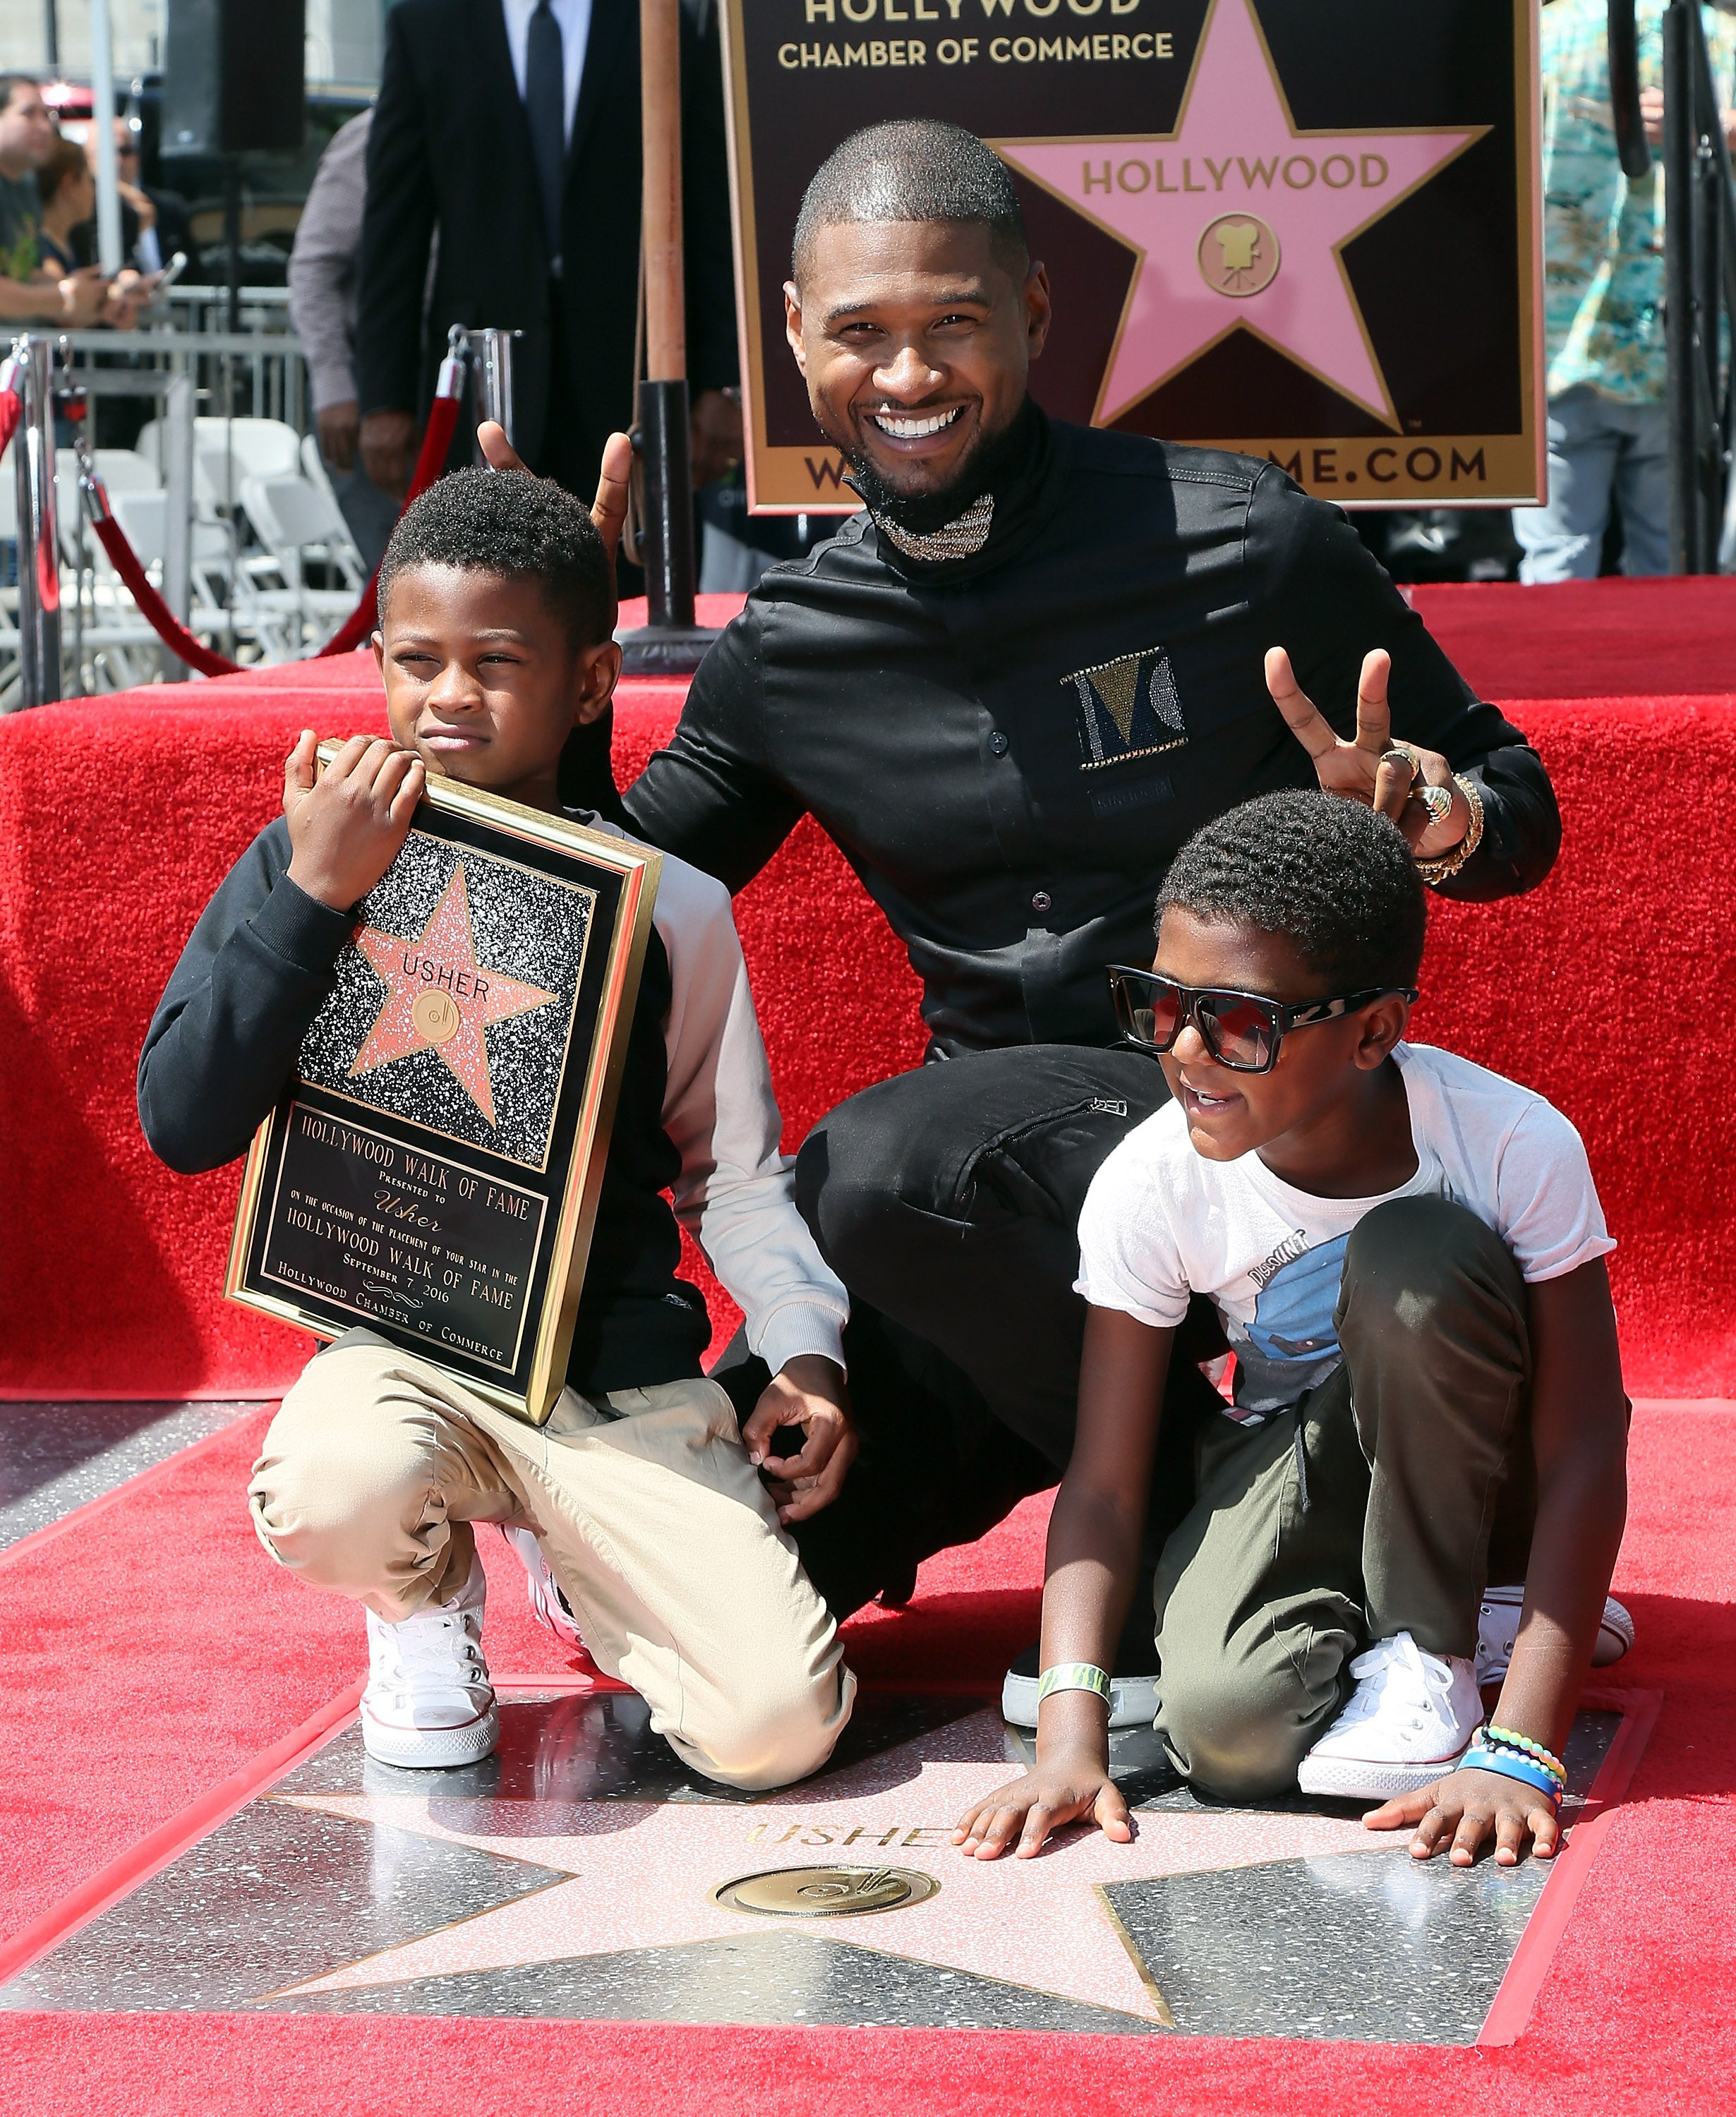 Usher Missed The Manchester Benefit Concert To Take His Son To Summer Camp